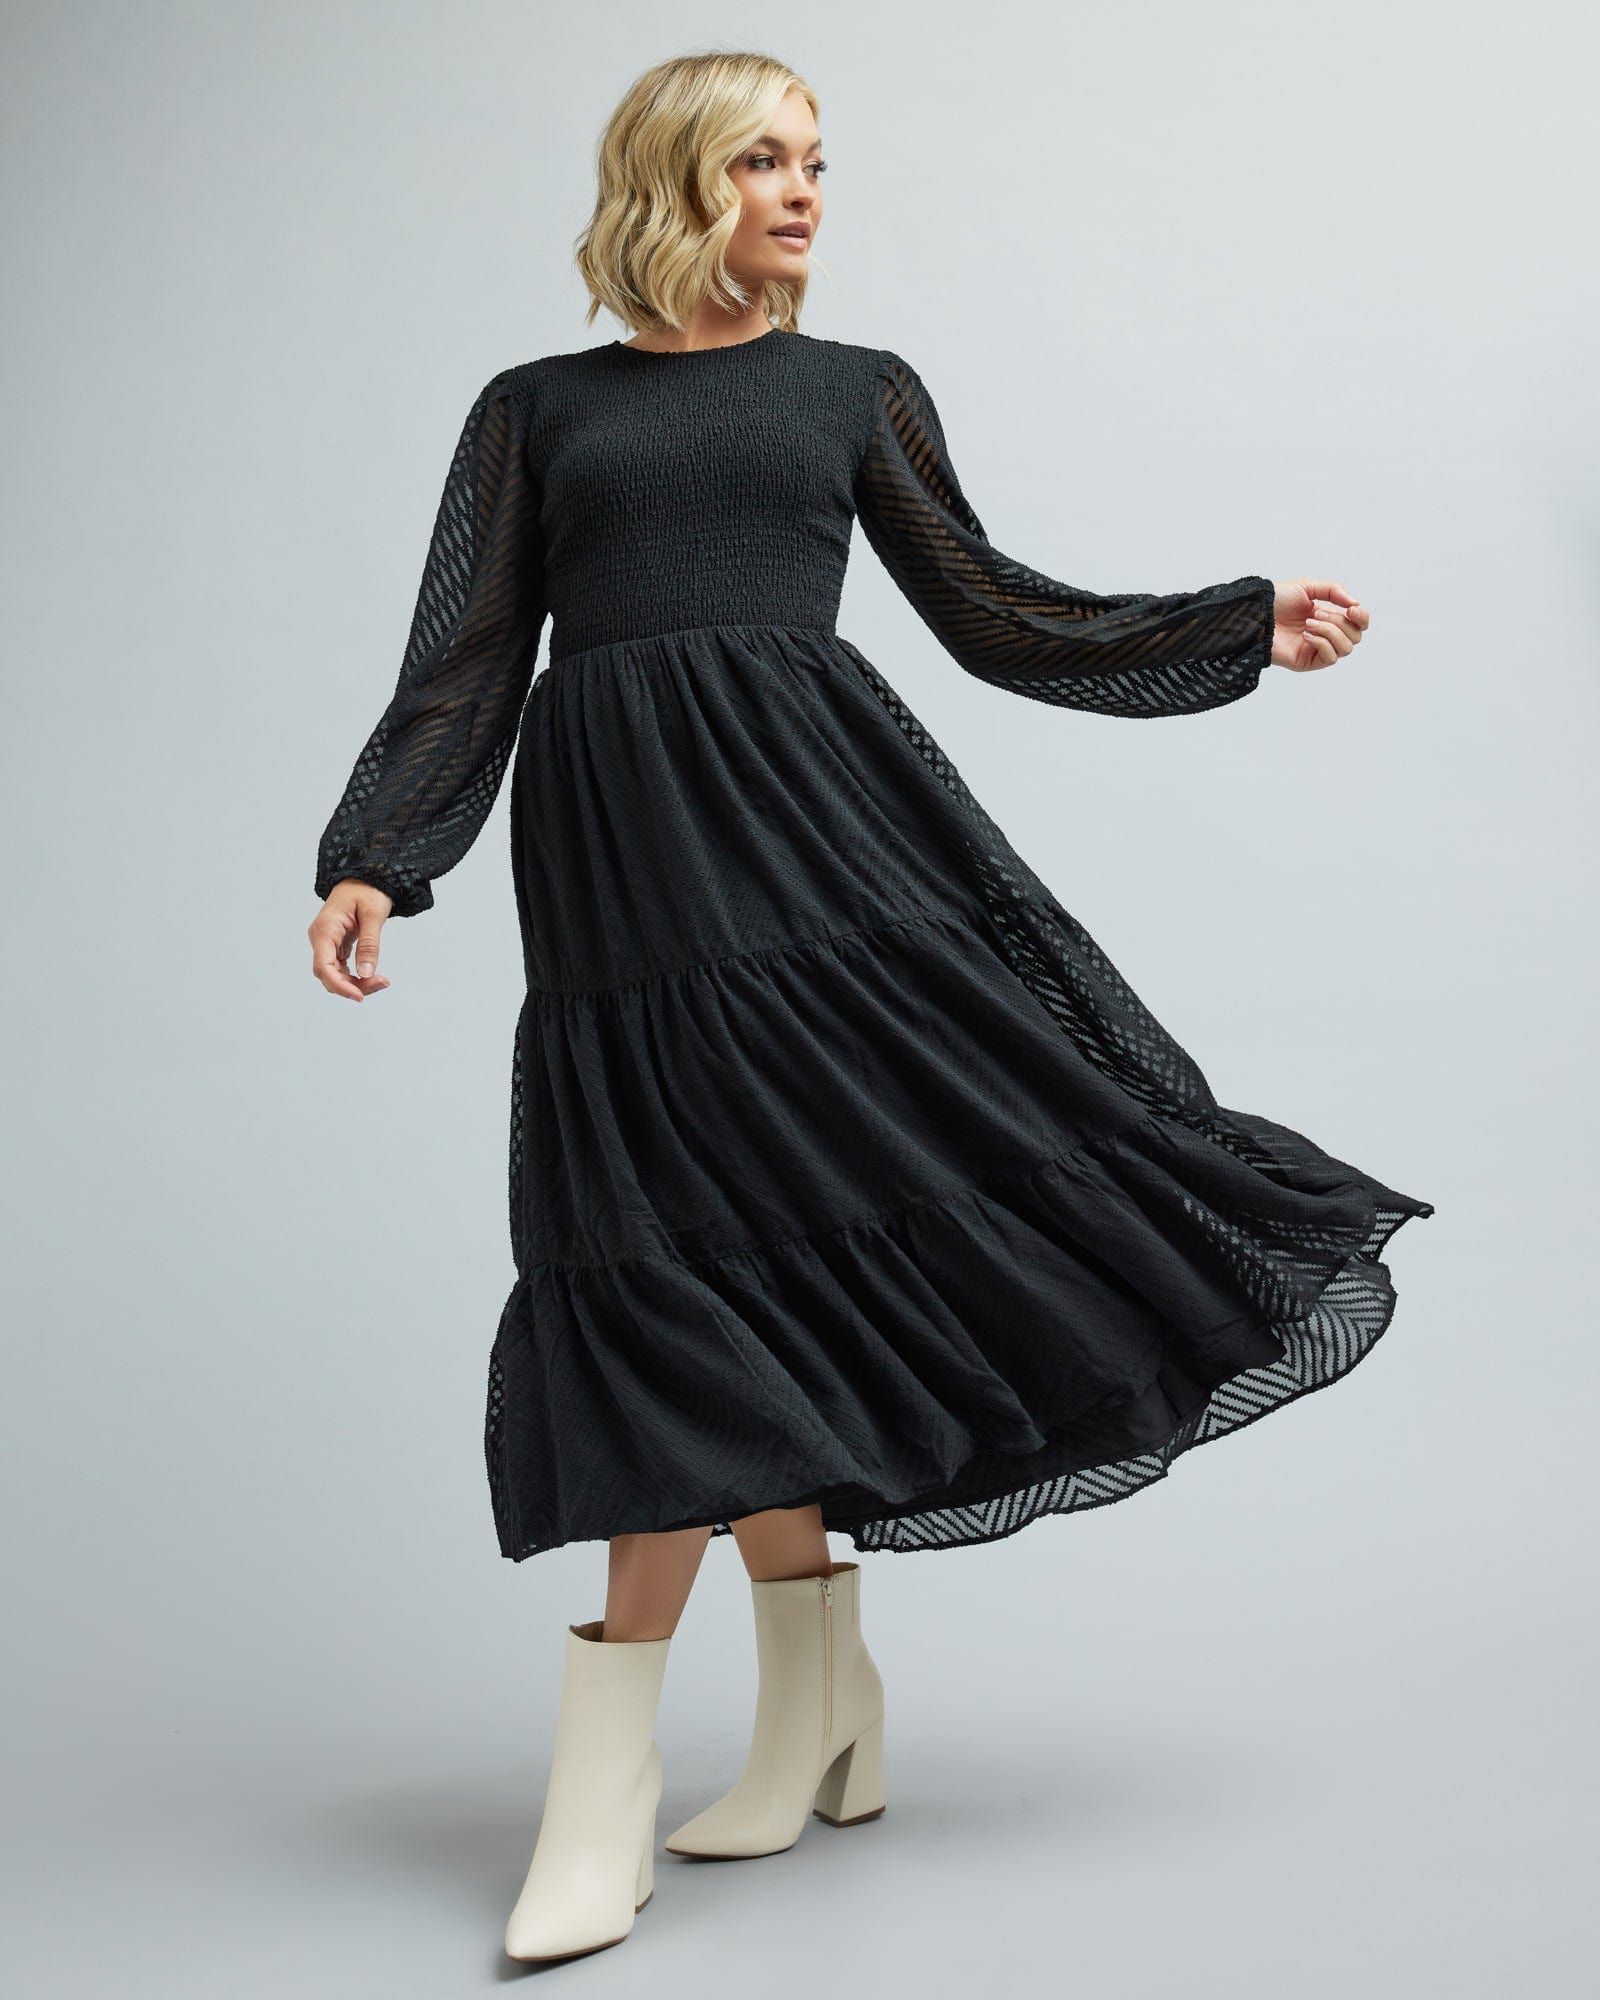 Woman in a long sleeve, smocked, tiered skirt dress